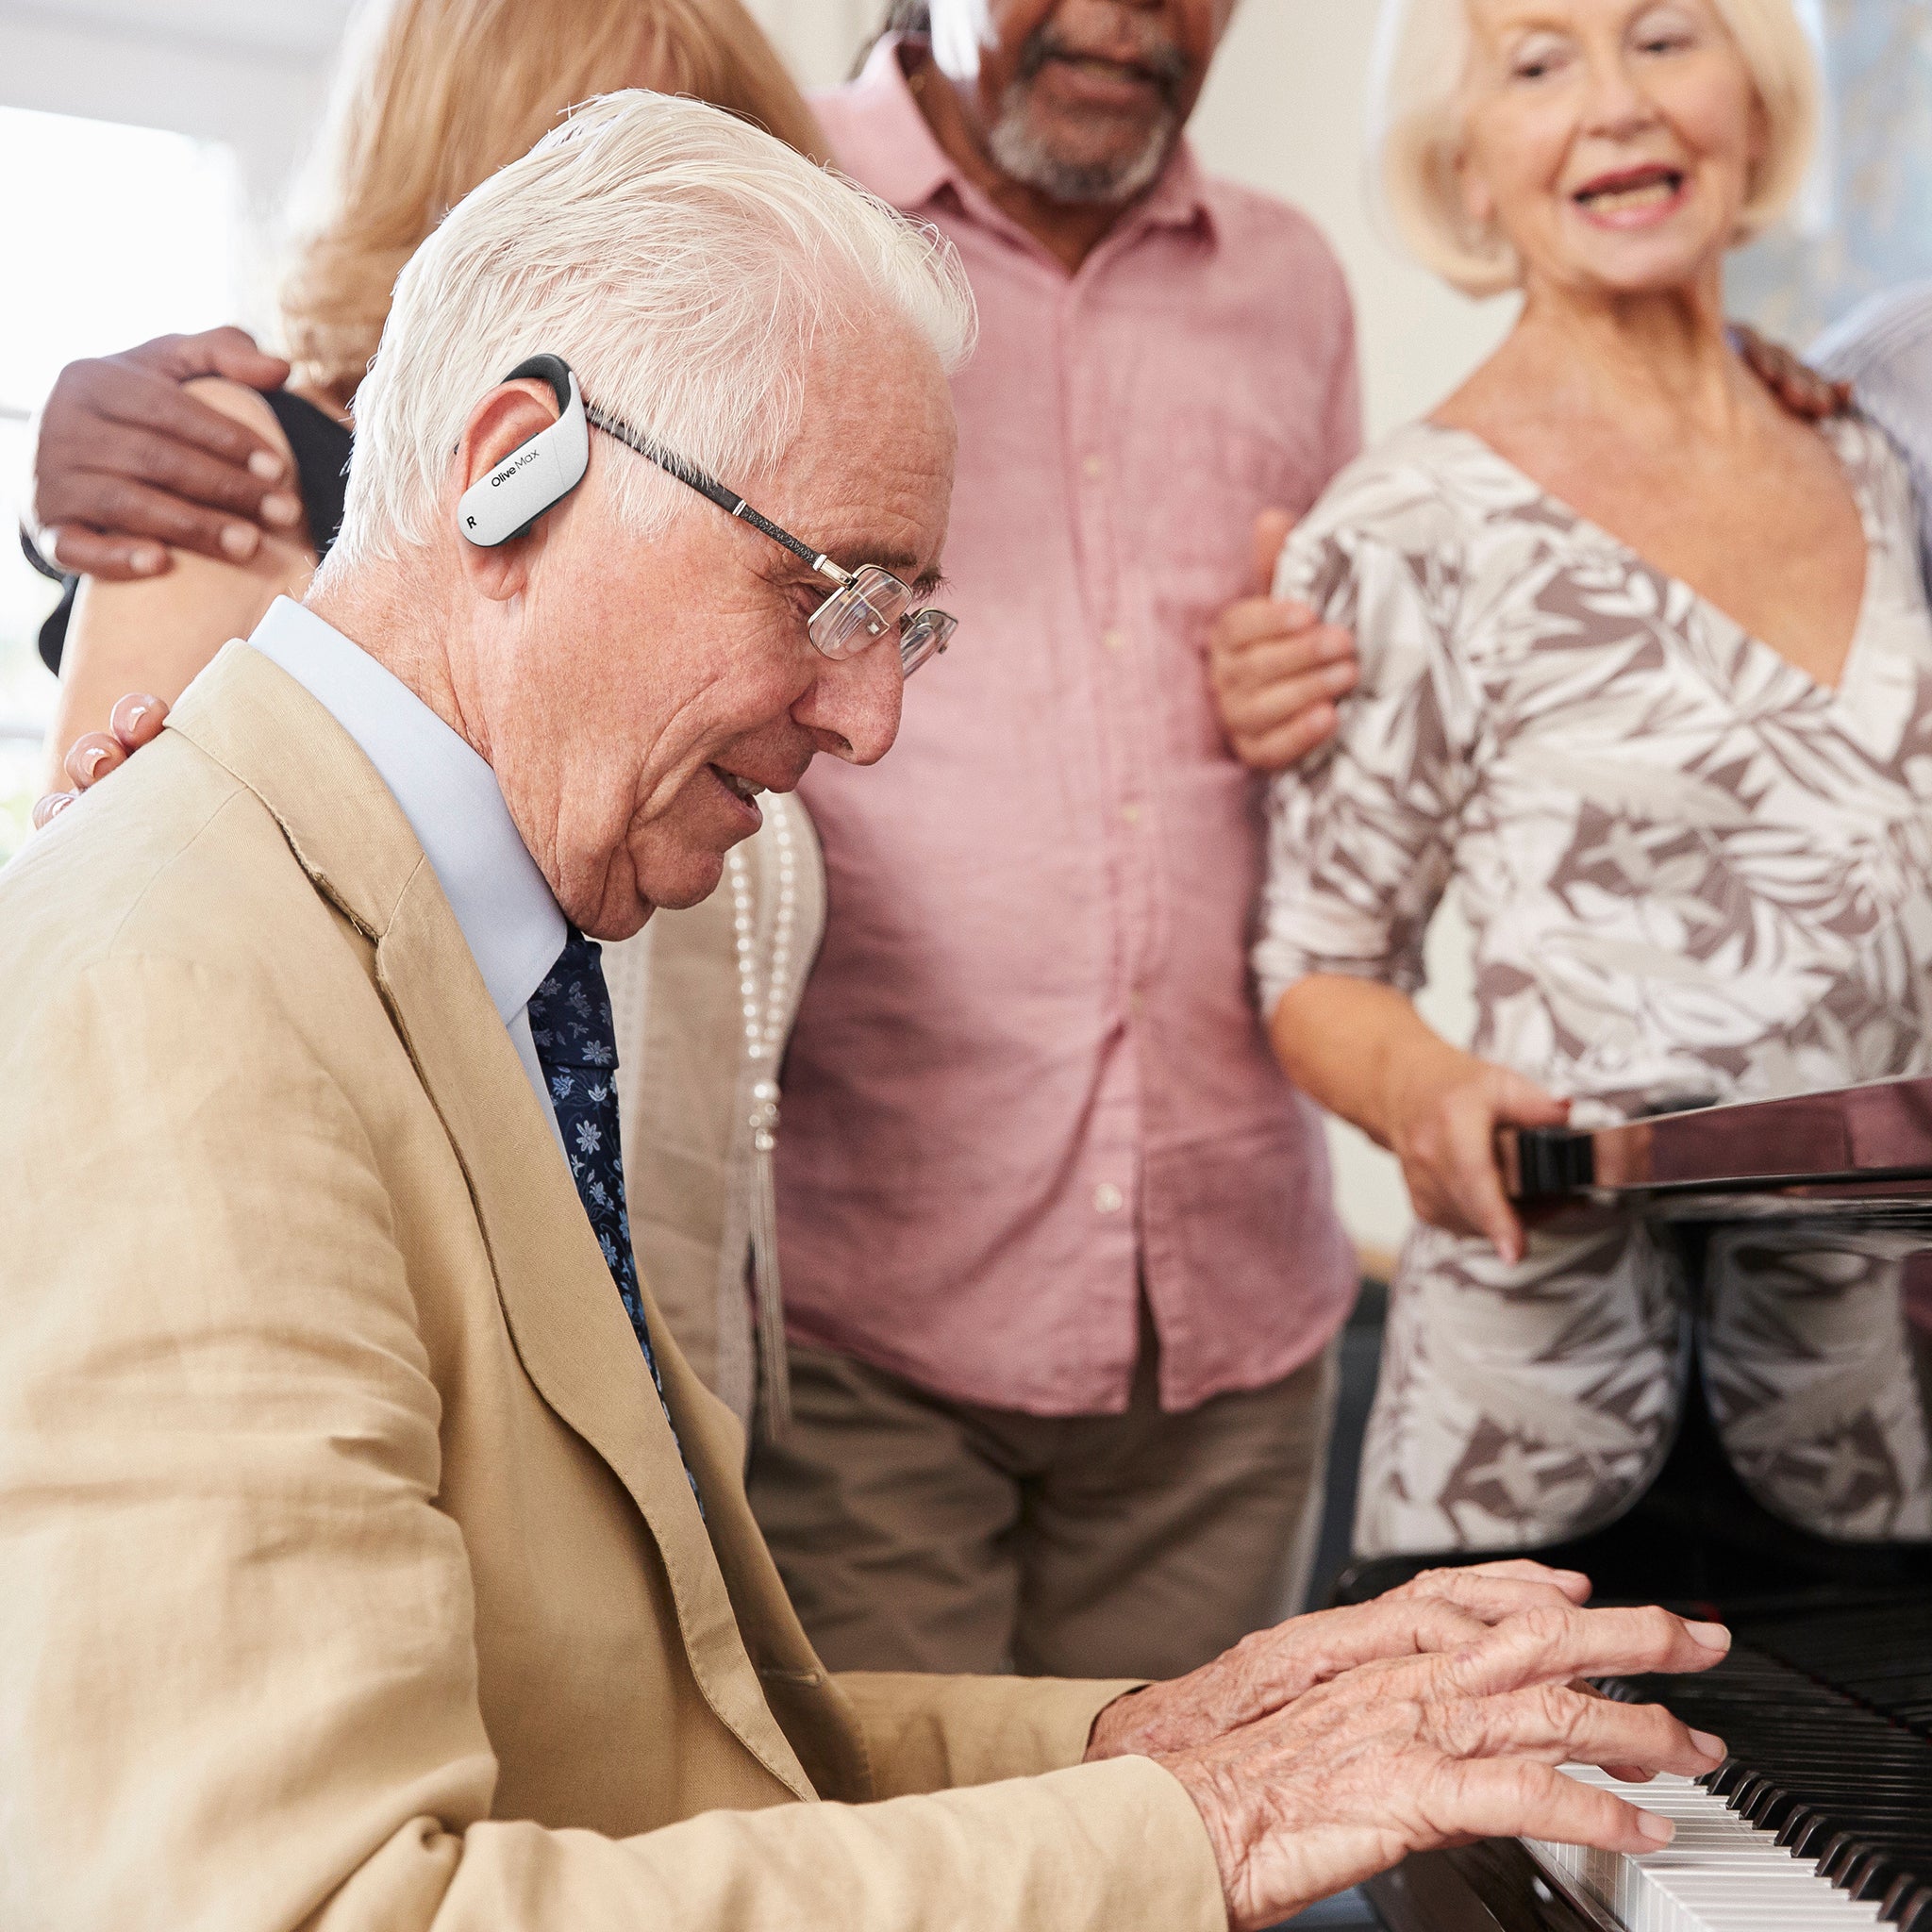 Elderly man with white hair playing the piano in front of friends, all benefiting from enhanced piano sounds and clearer voices thanks to Olivemax hearing aids.